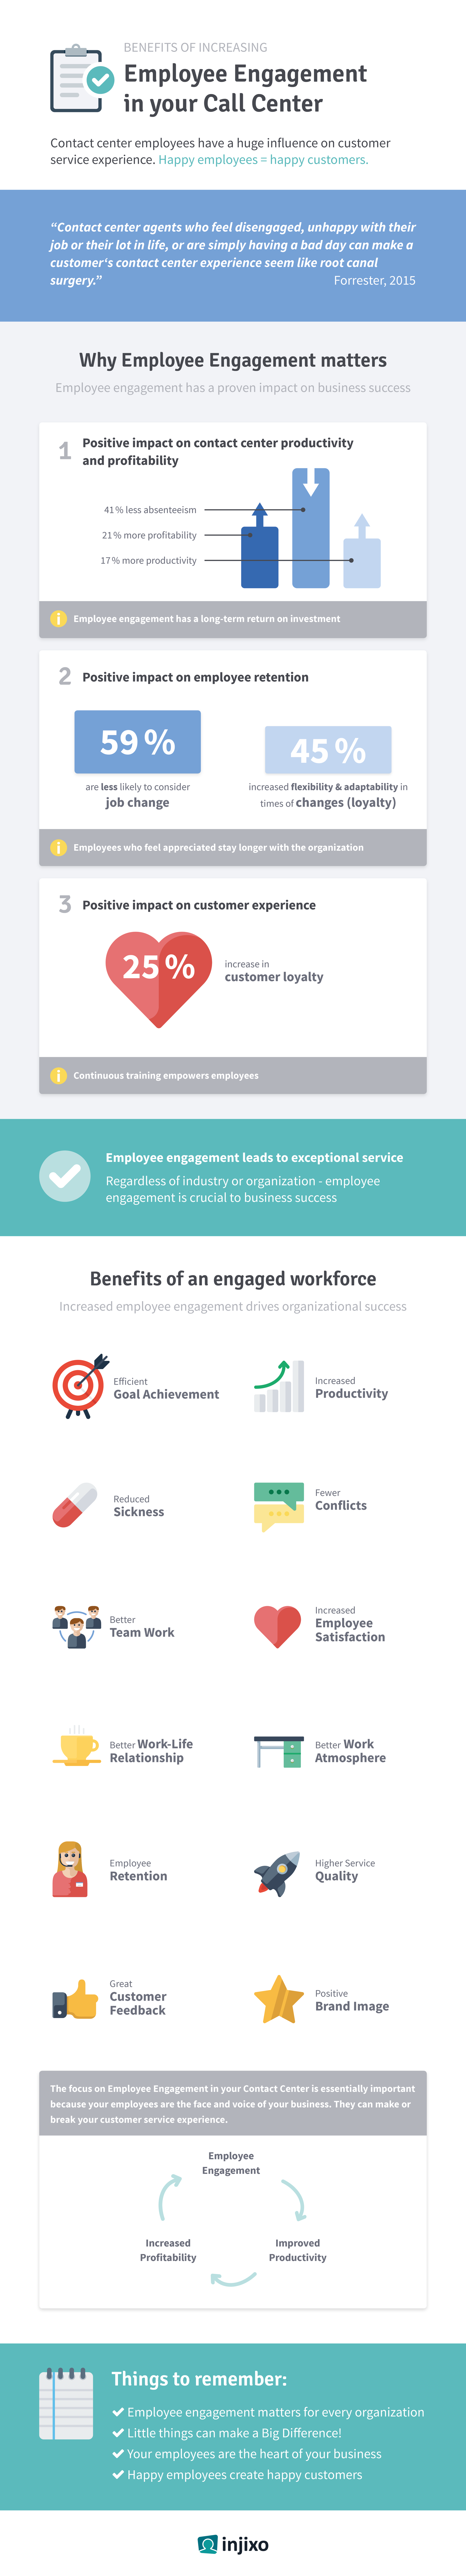 Infographic: Benefits of Increasing Employee Engagement in your call center